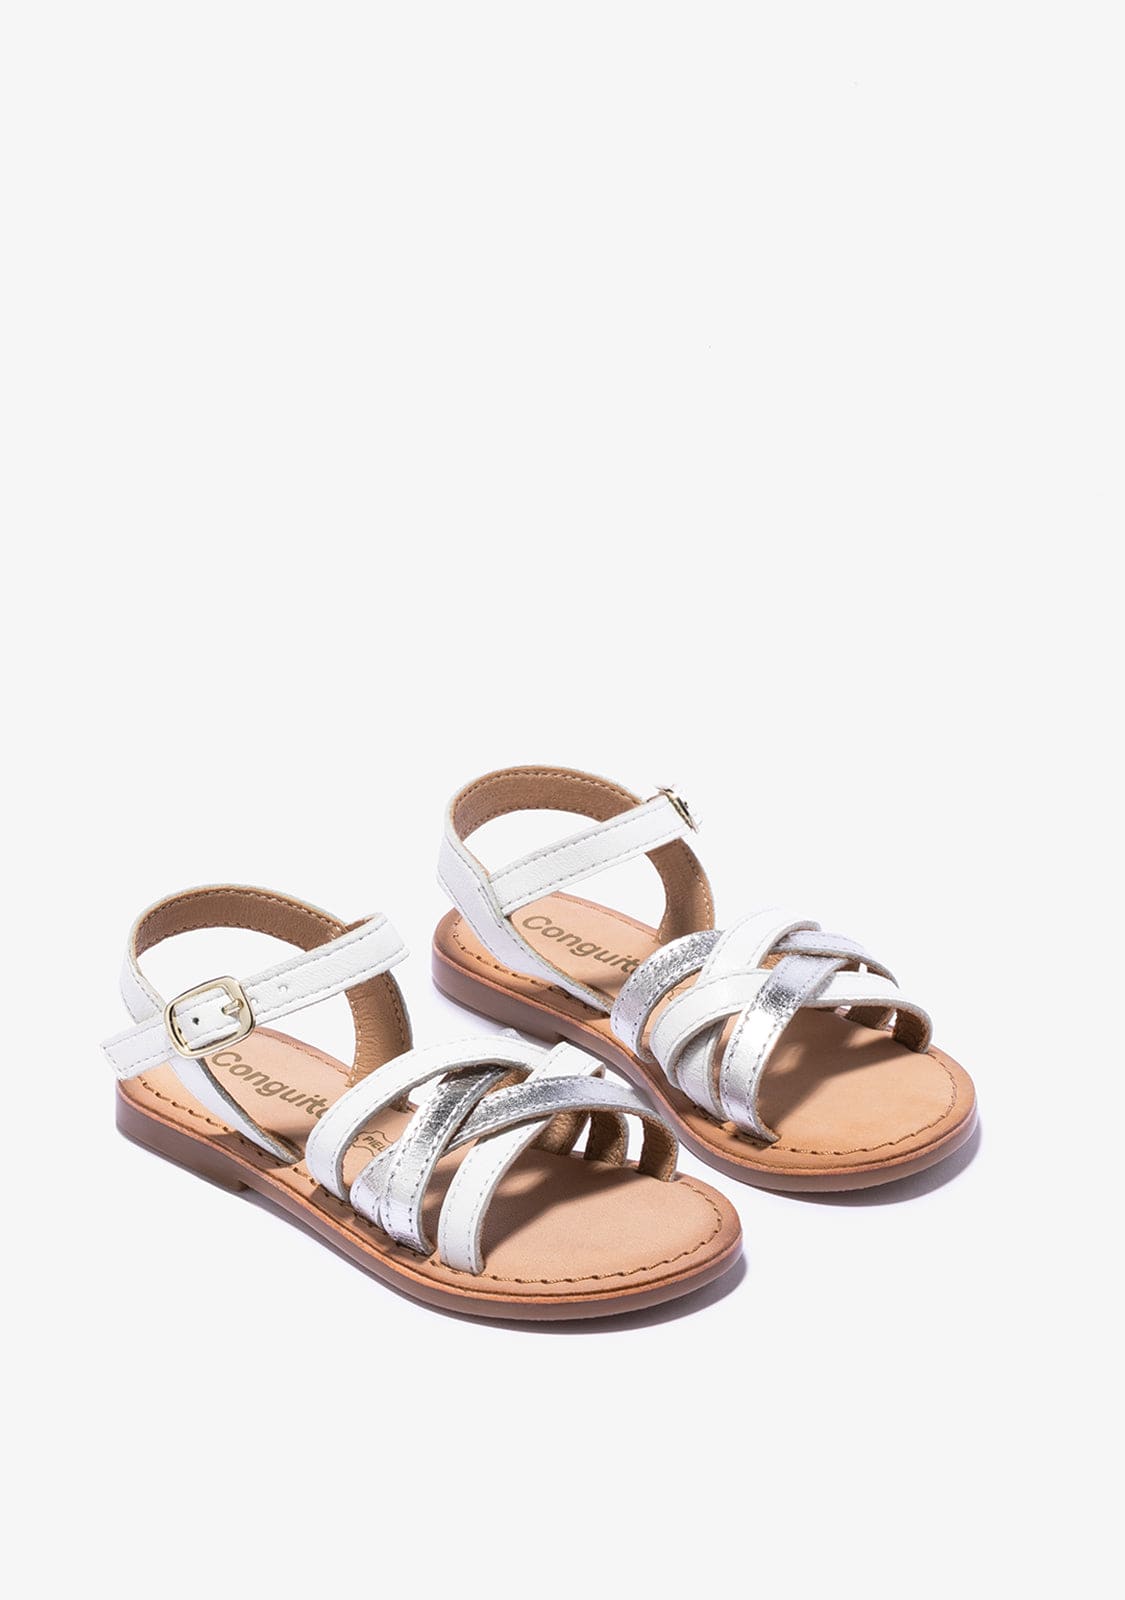 CONGUITOS Shoes Girl's White Silver Buckle Sandals Napa